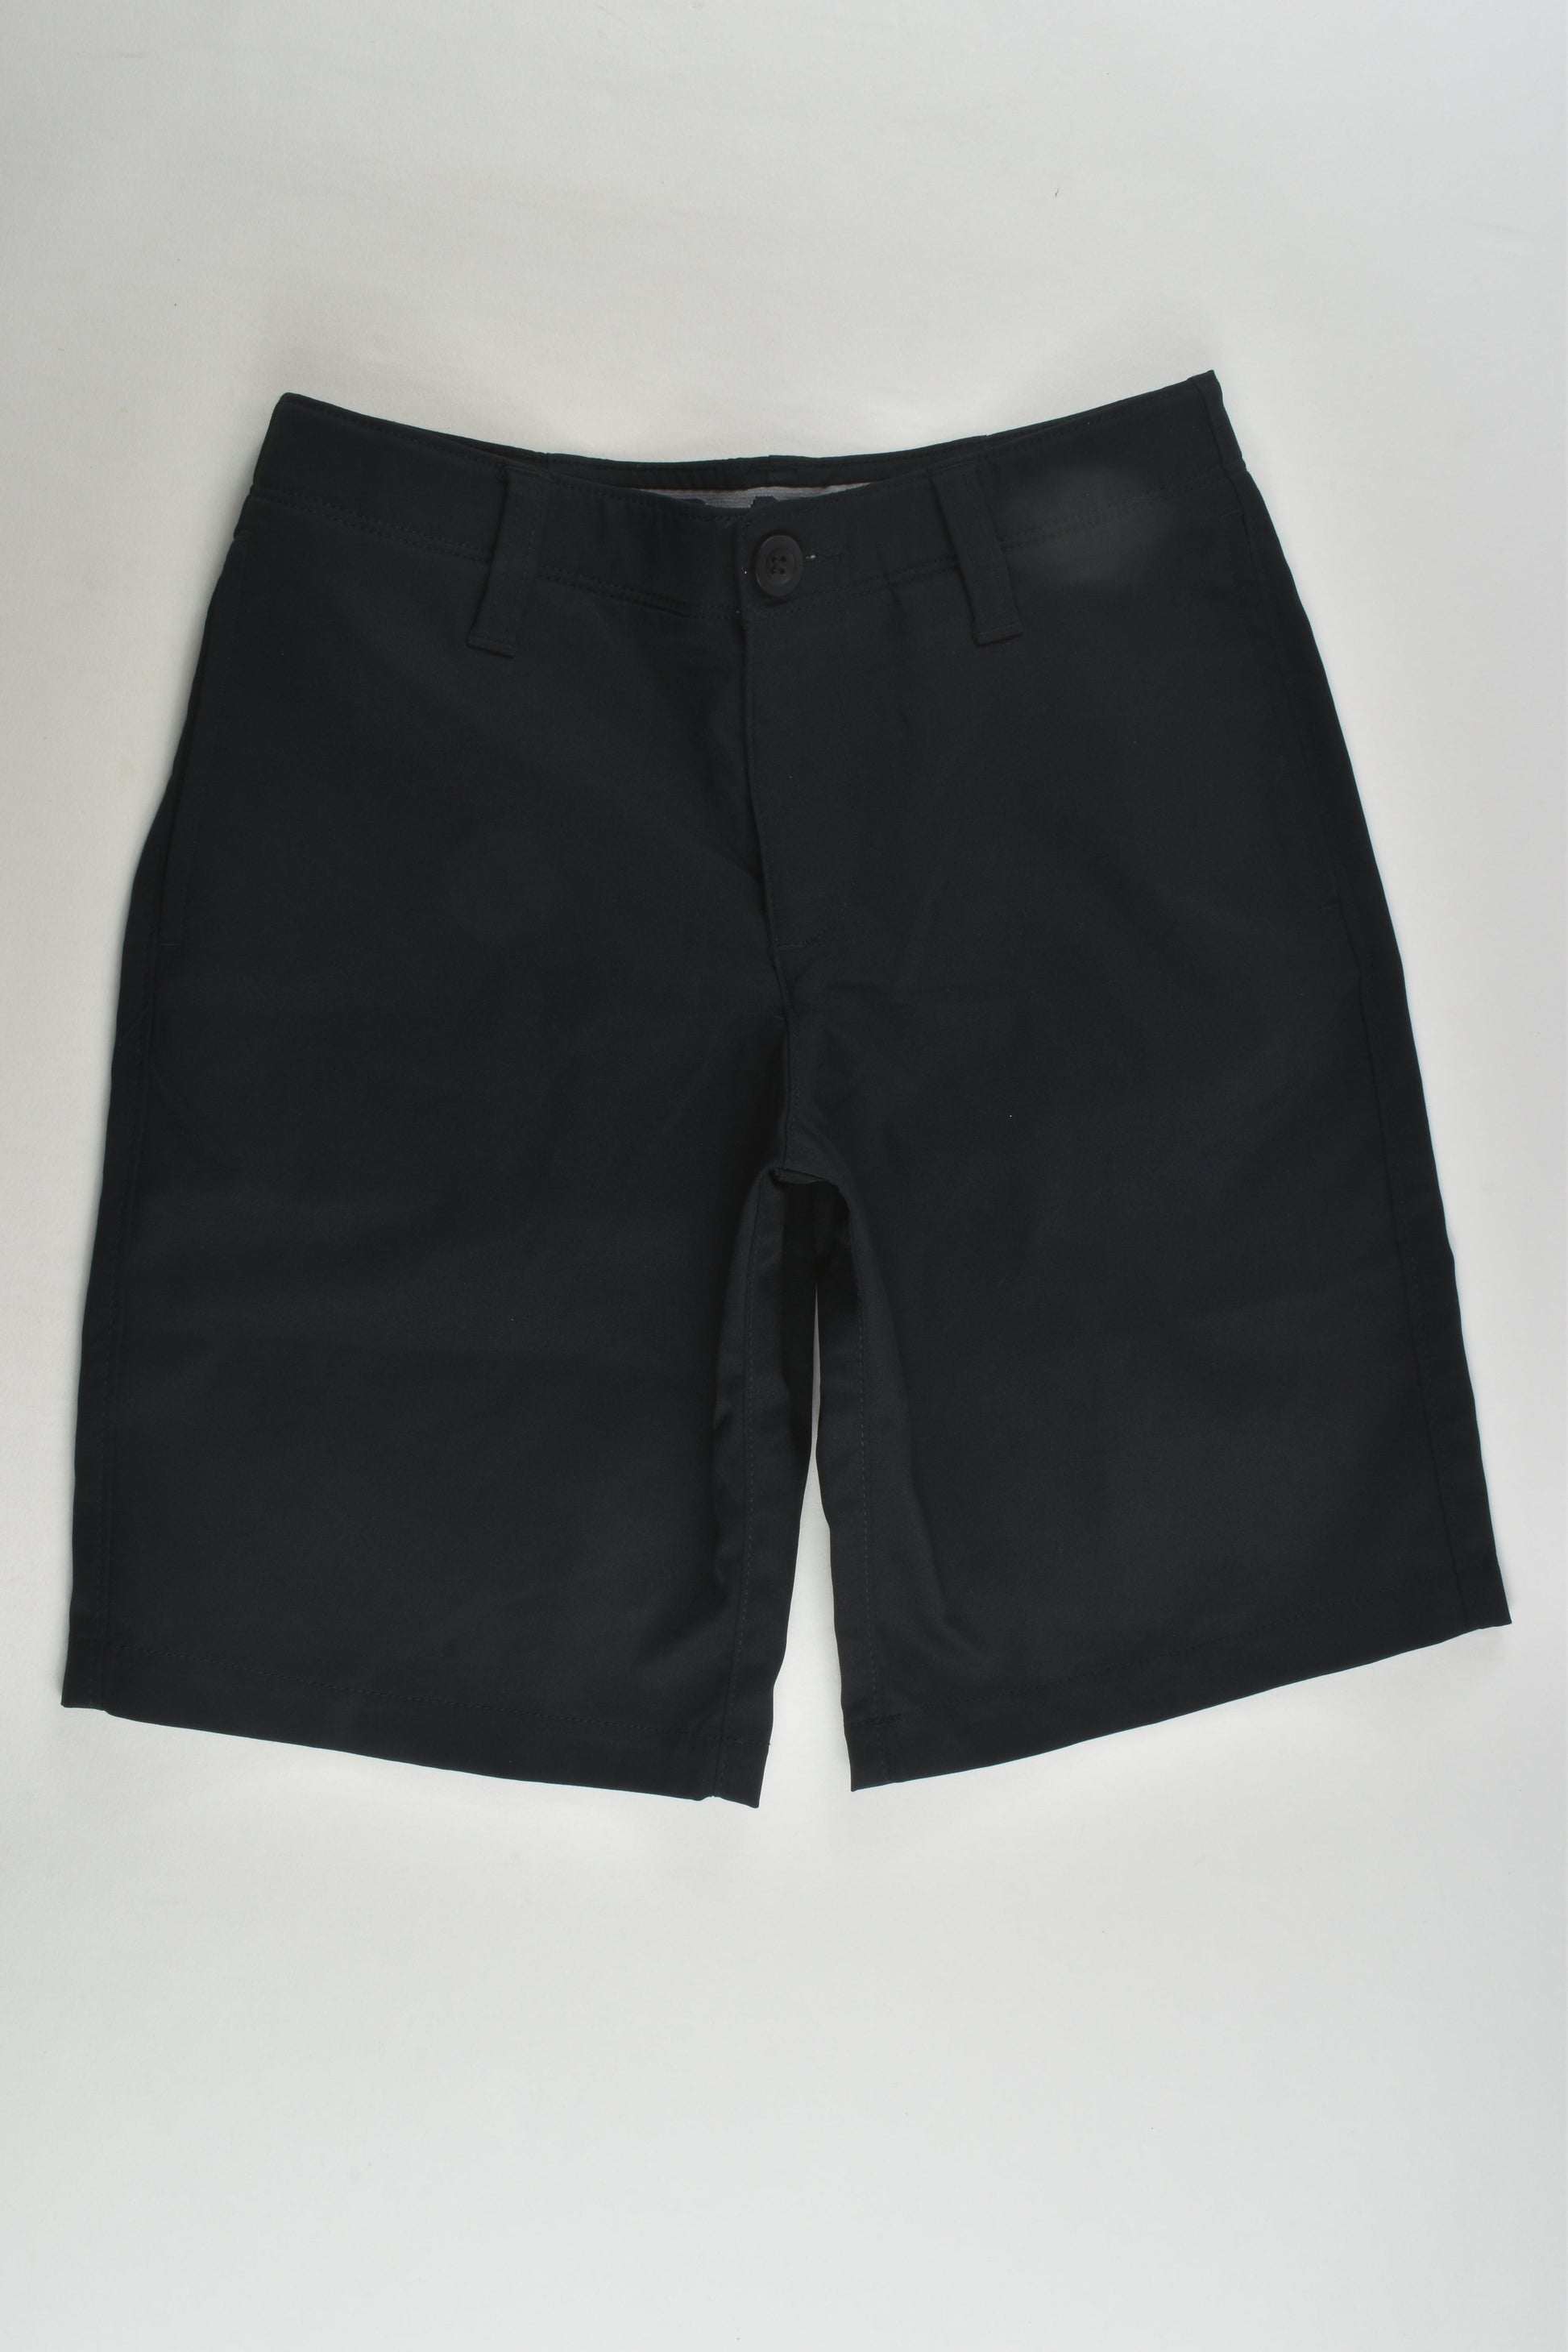 Under Armour Size 8 Shorts